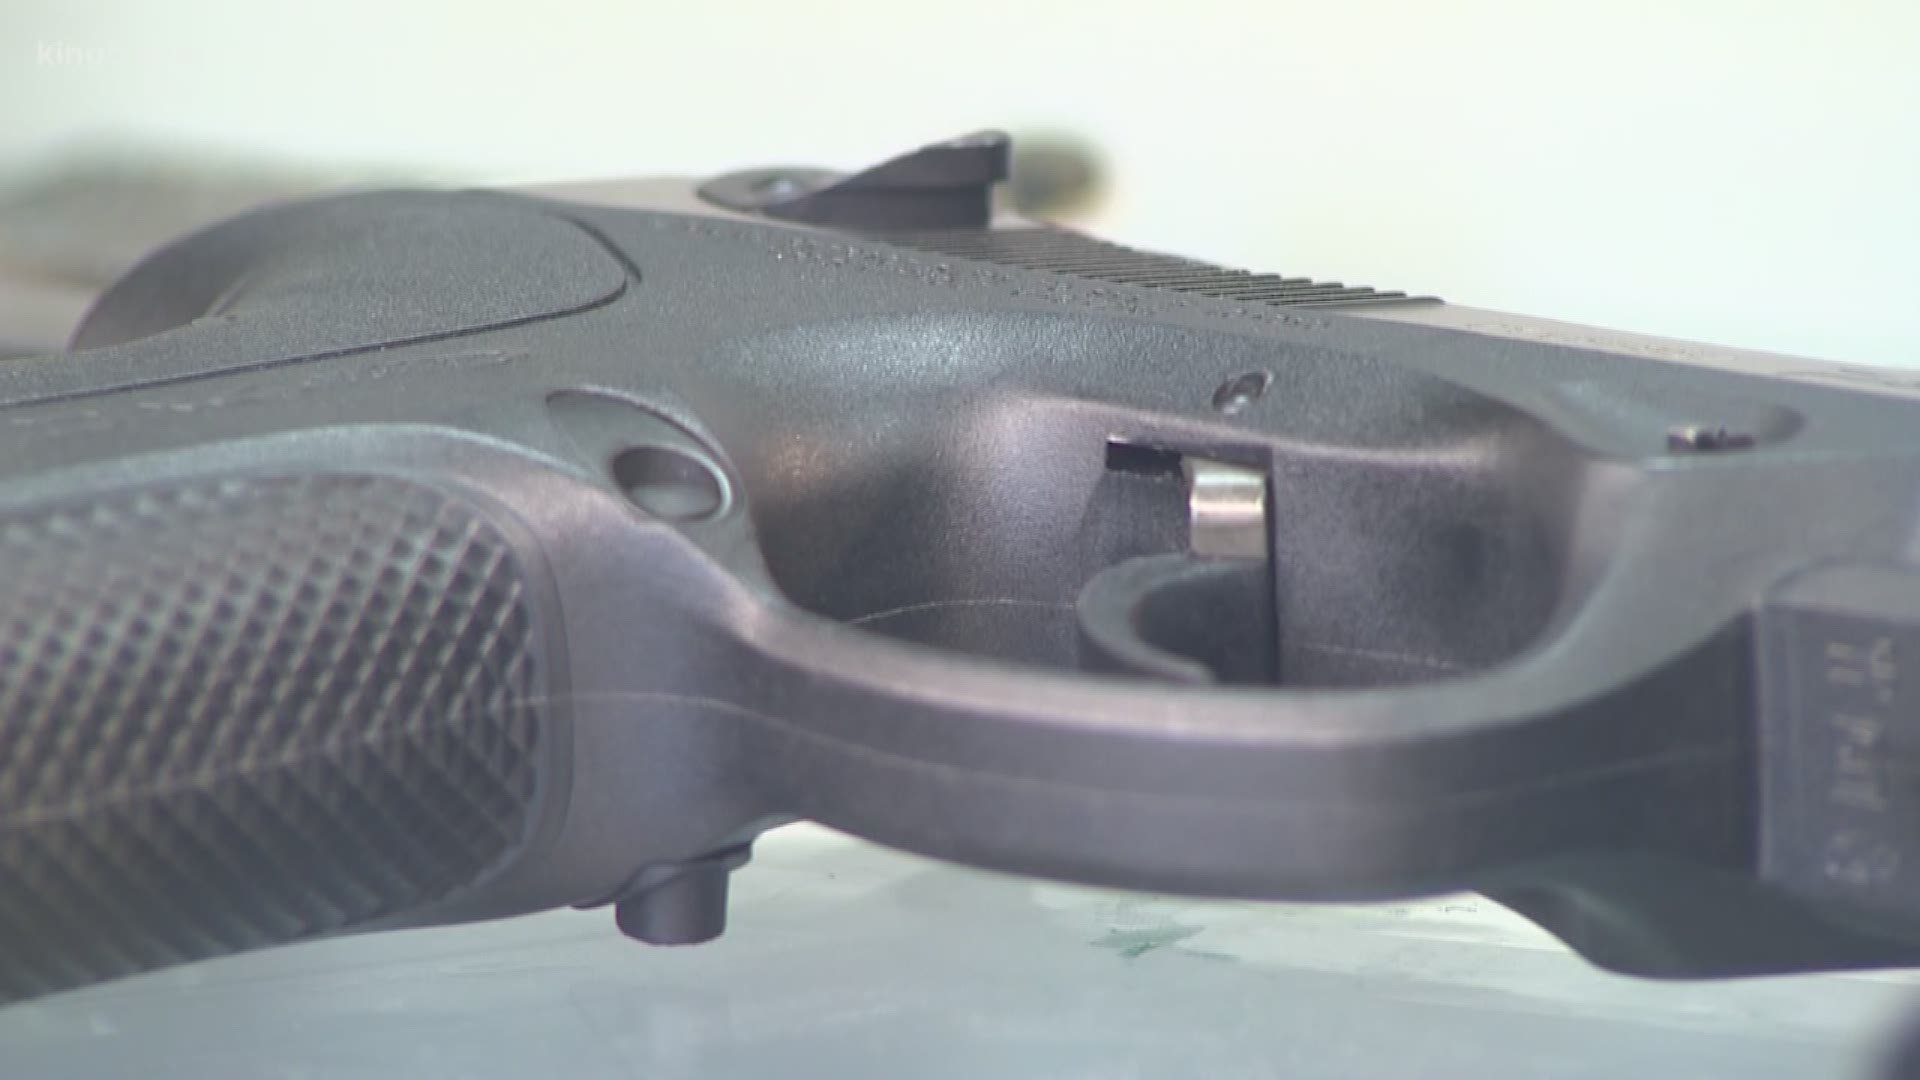 An exclusive KING 5 News poll found 45% of voters think Washington gun laws aren't strict enough.